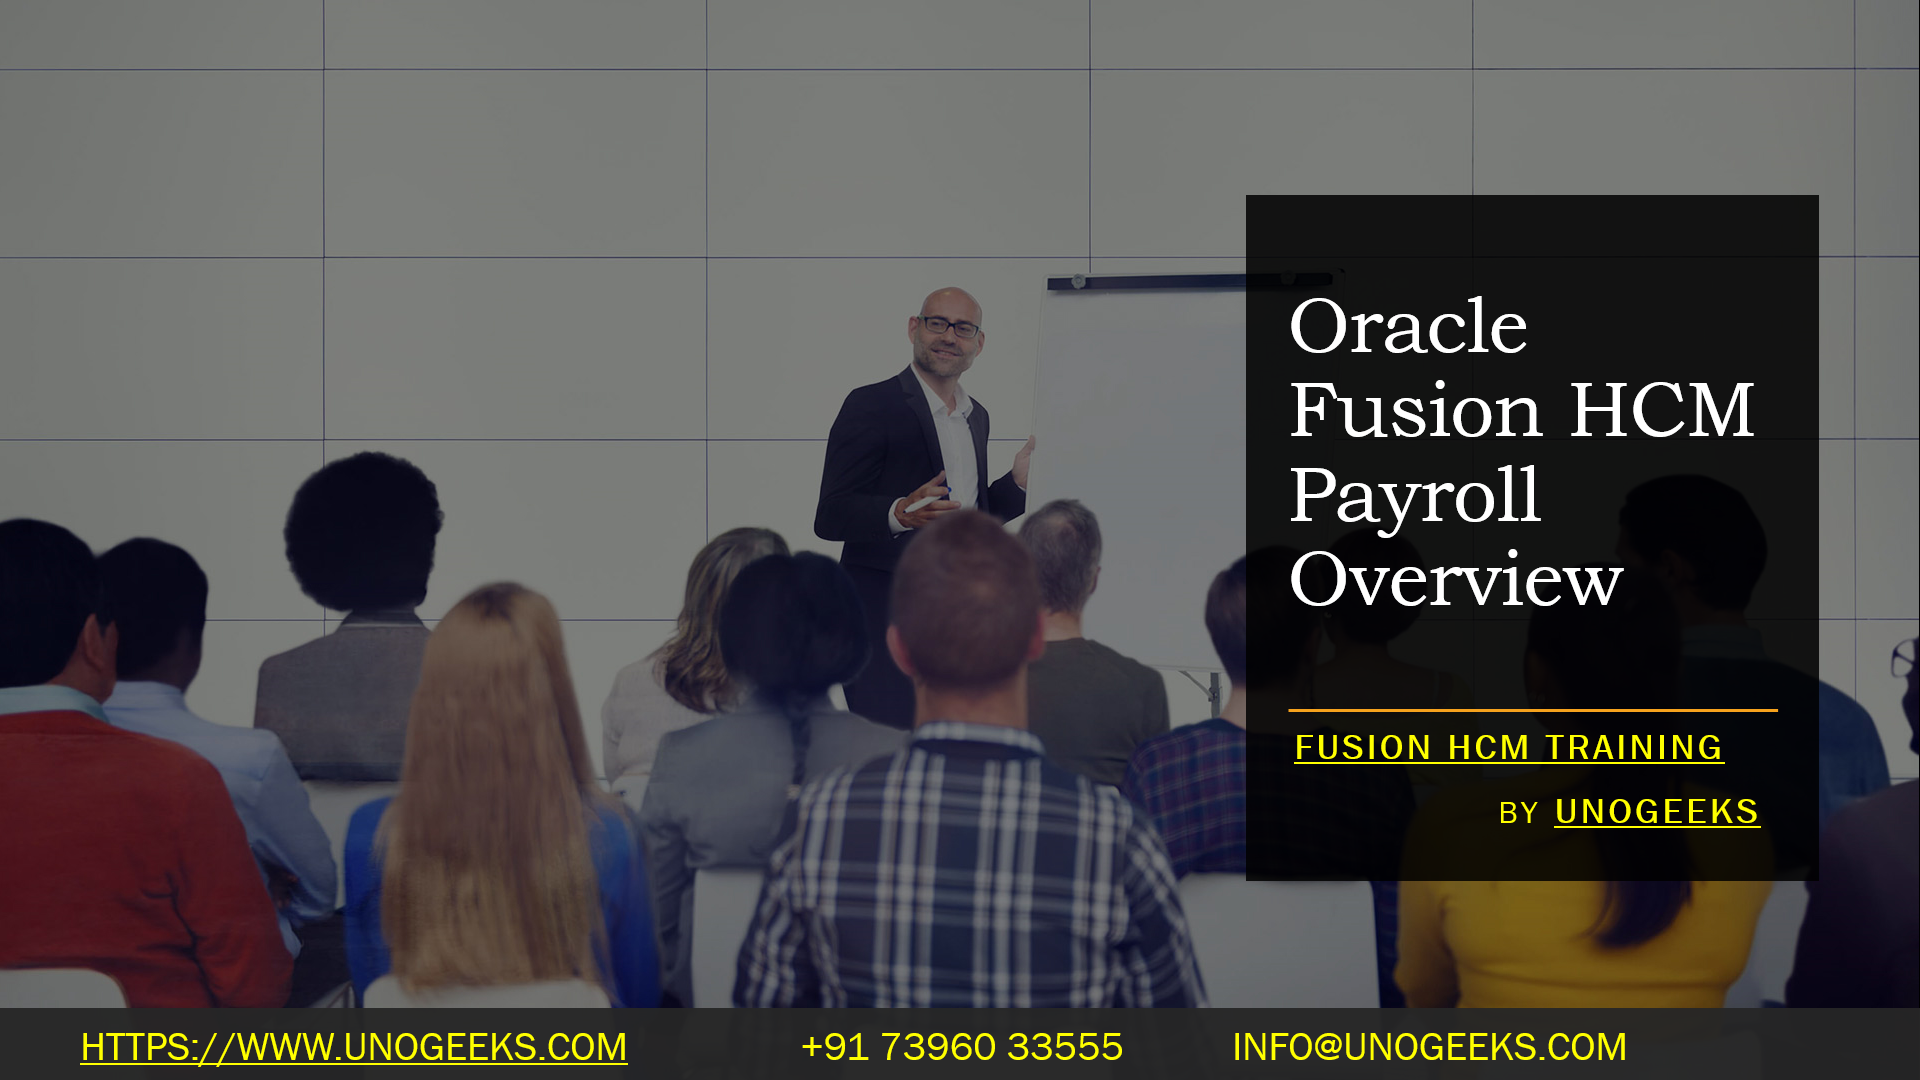 Oracle Fusion HCM Payroll Overview